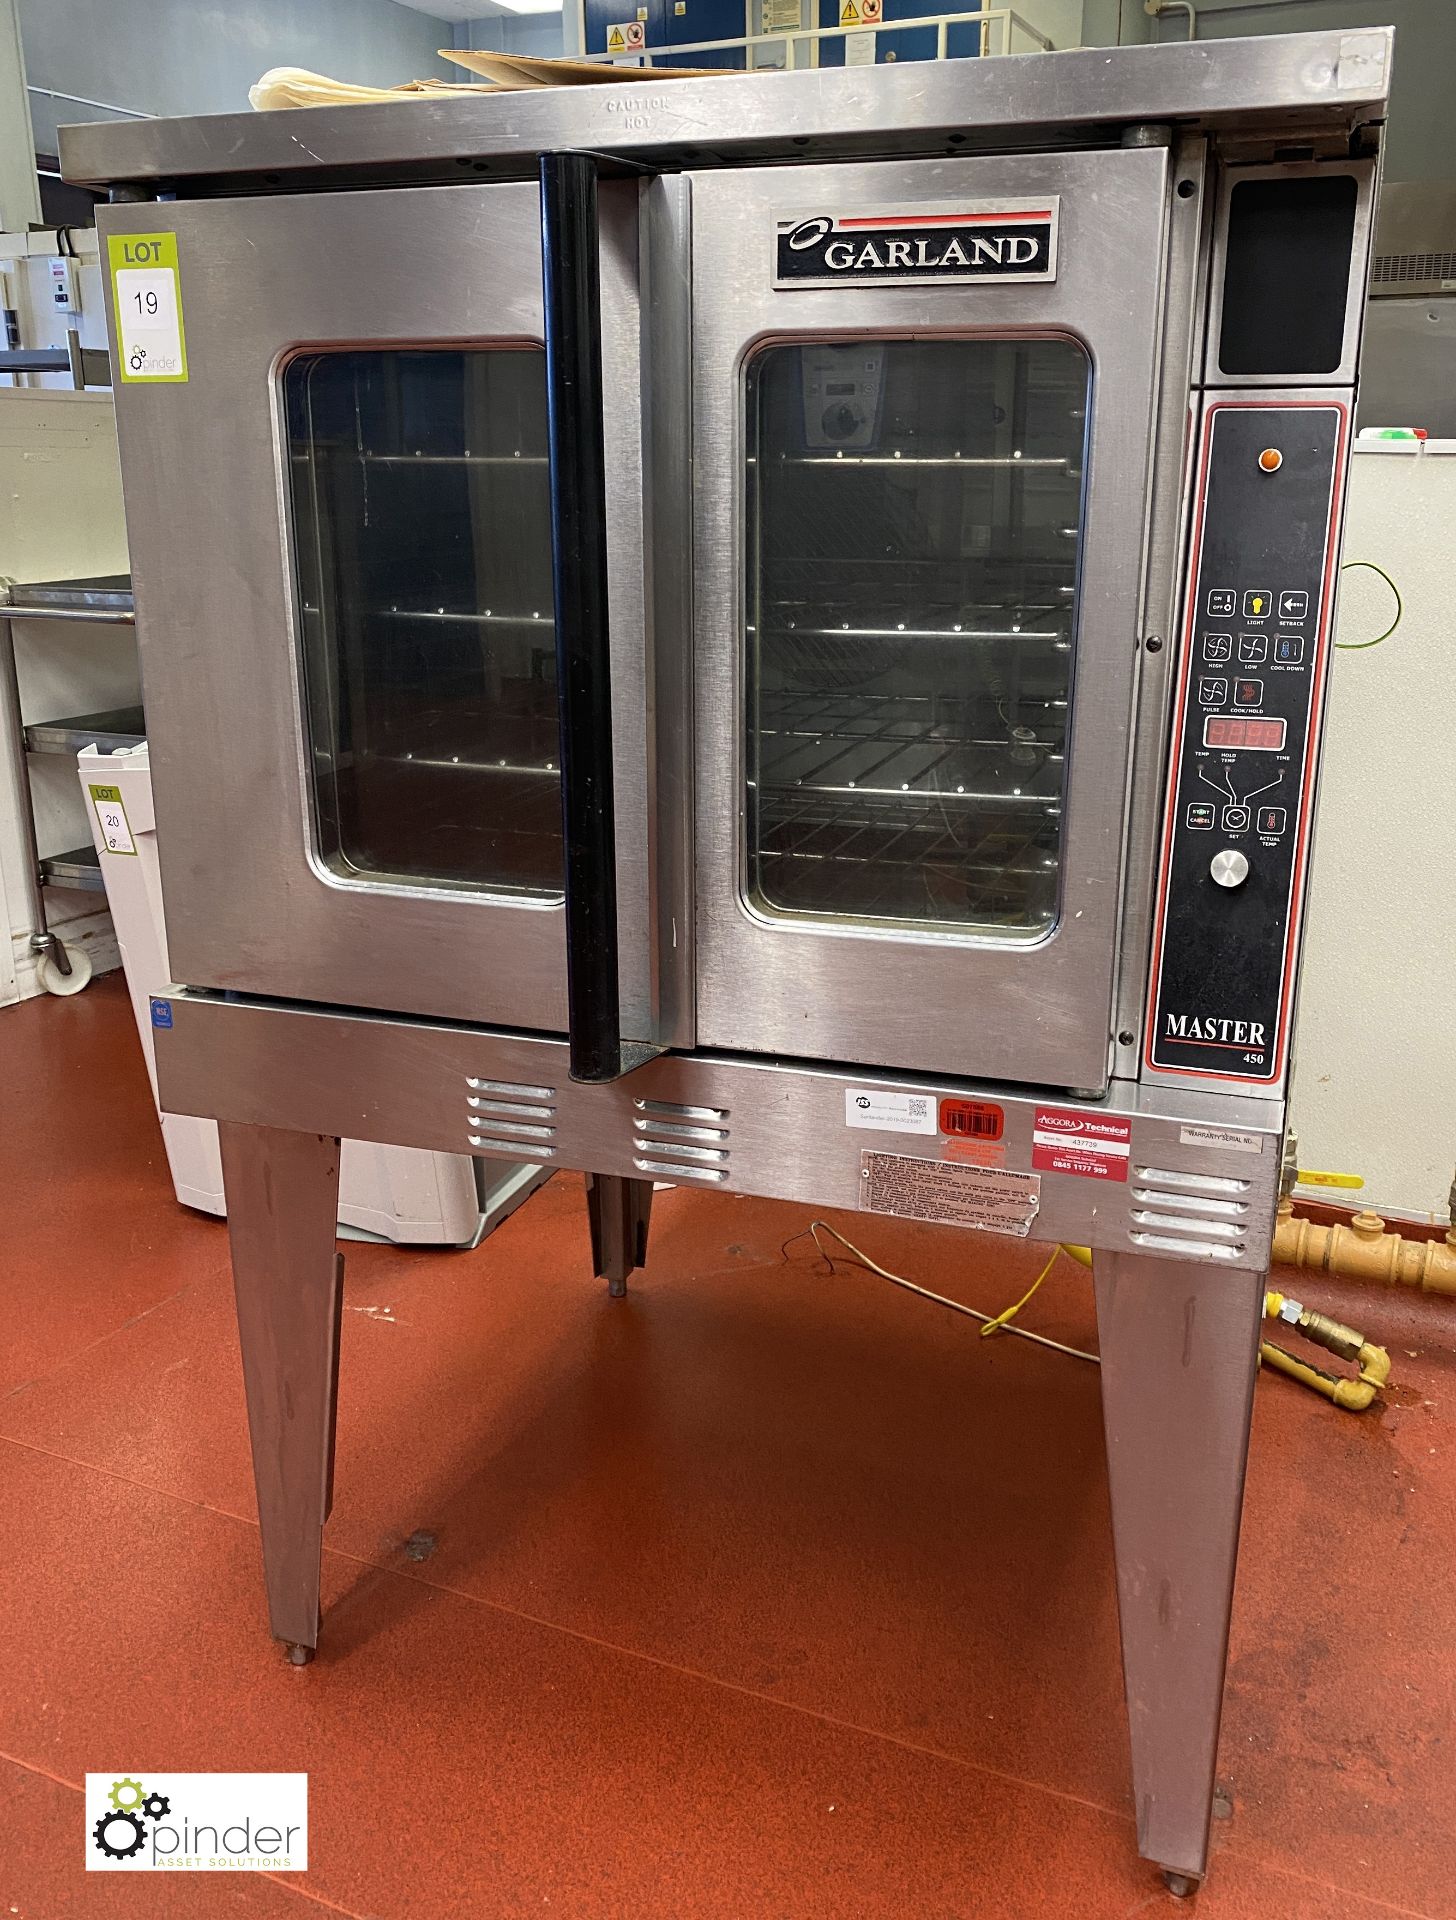 Garland Master 450 gas fired Convection Oven, 970mm x 970mm x 1460mm (lot location – Parkview